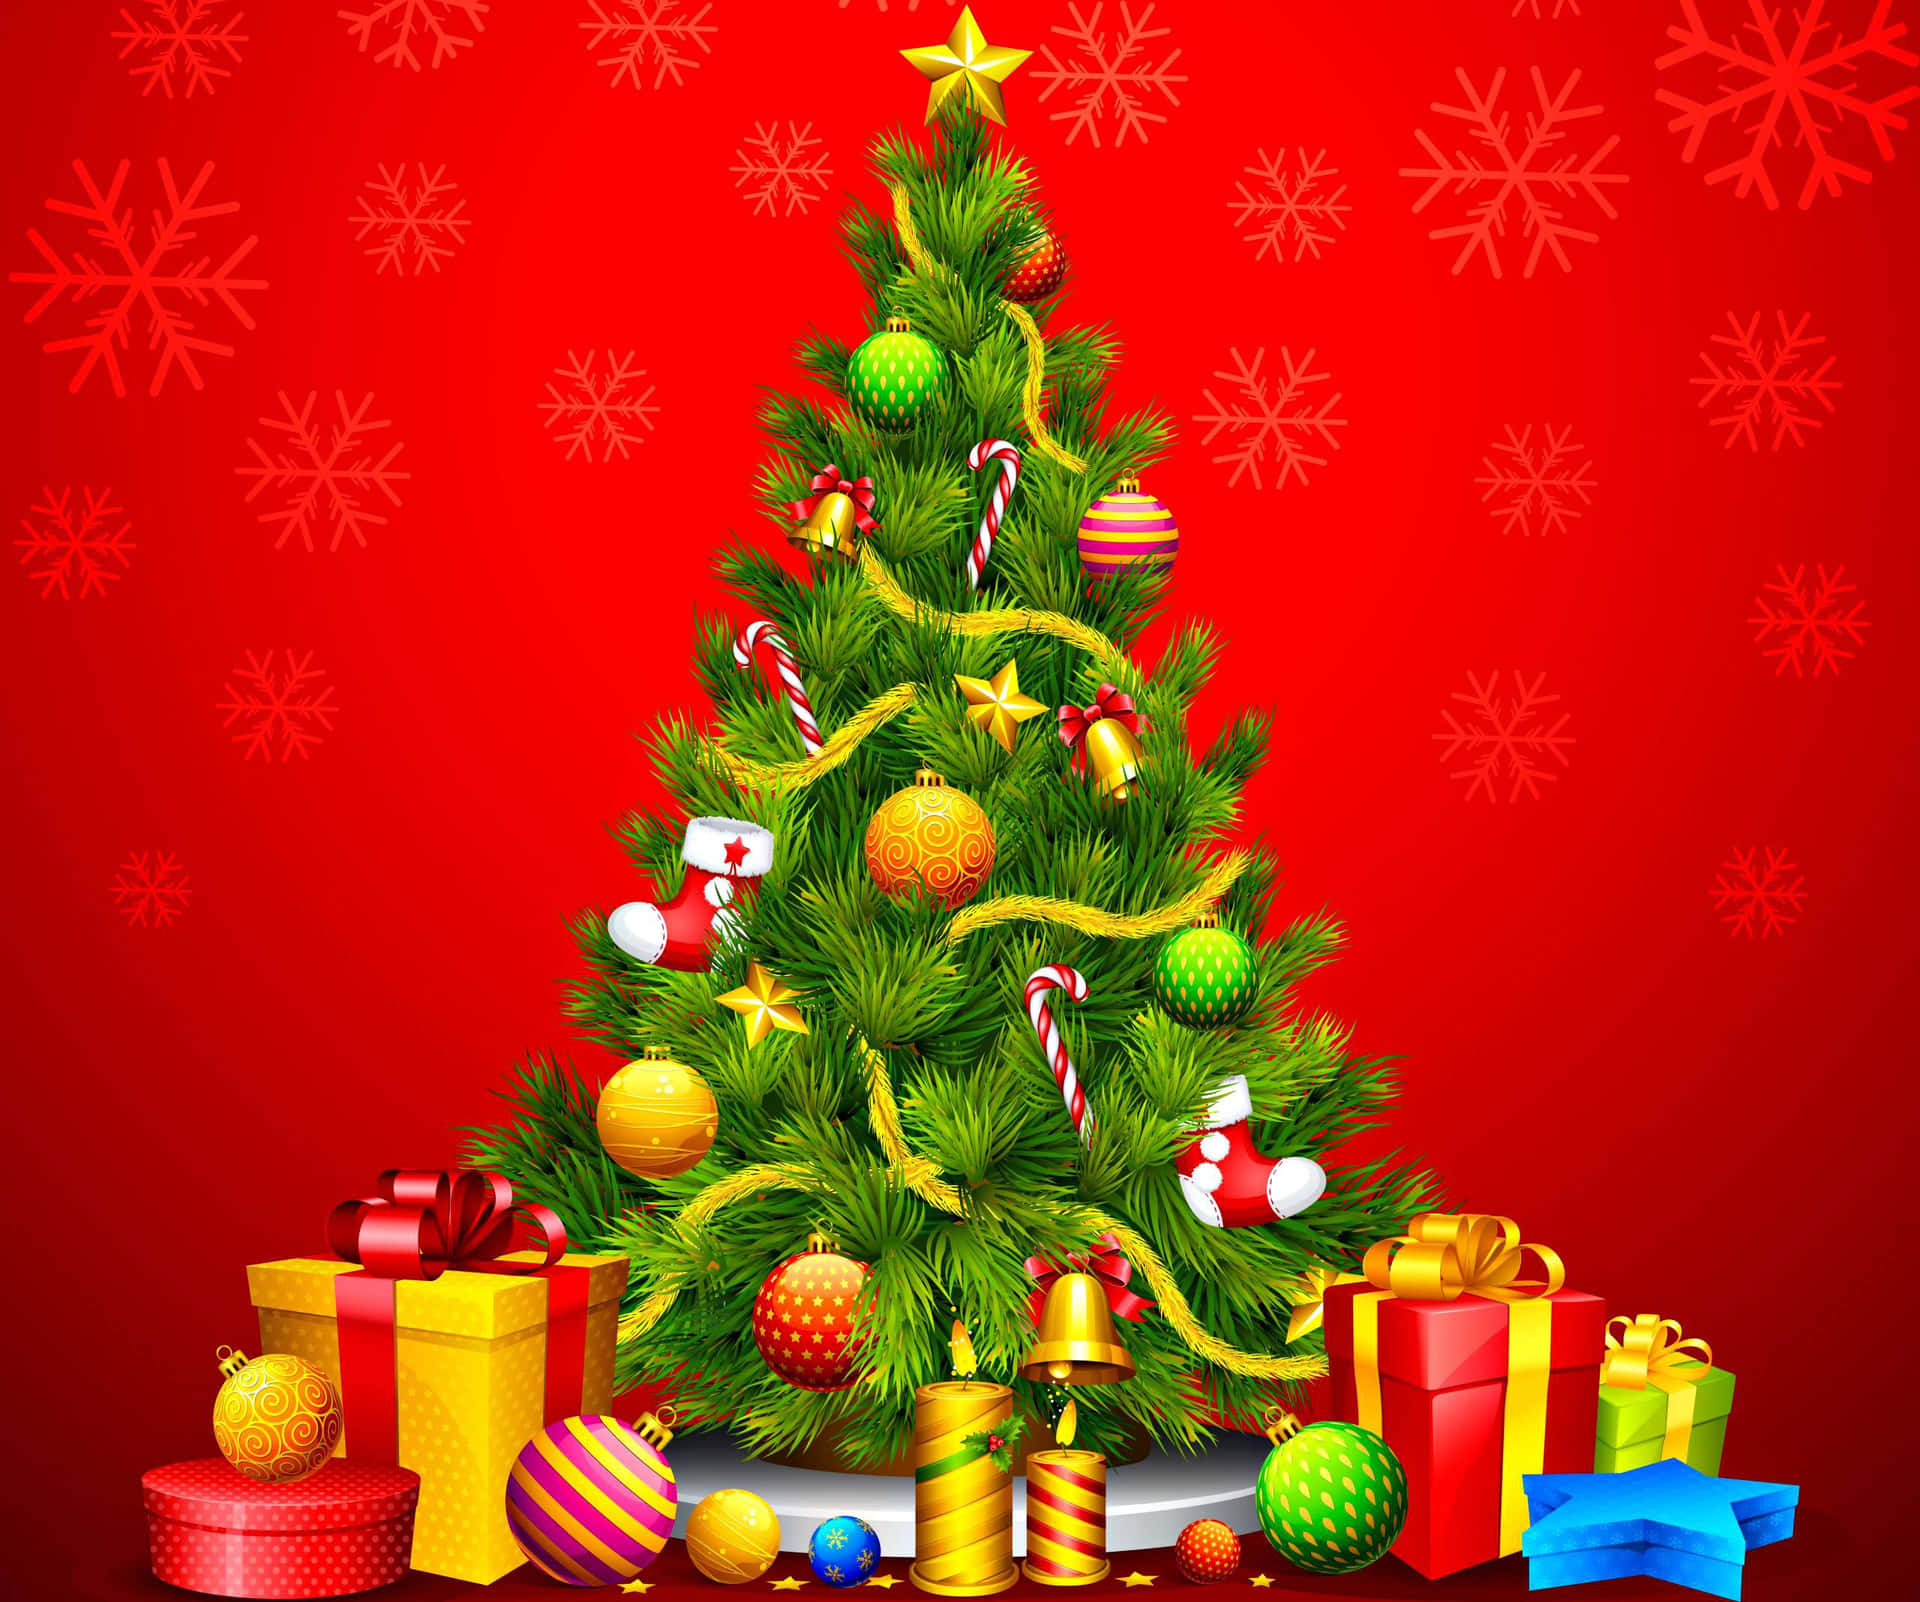 Christmas Trees Gifts Decor Picture